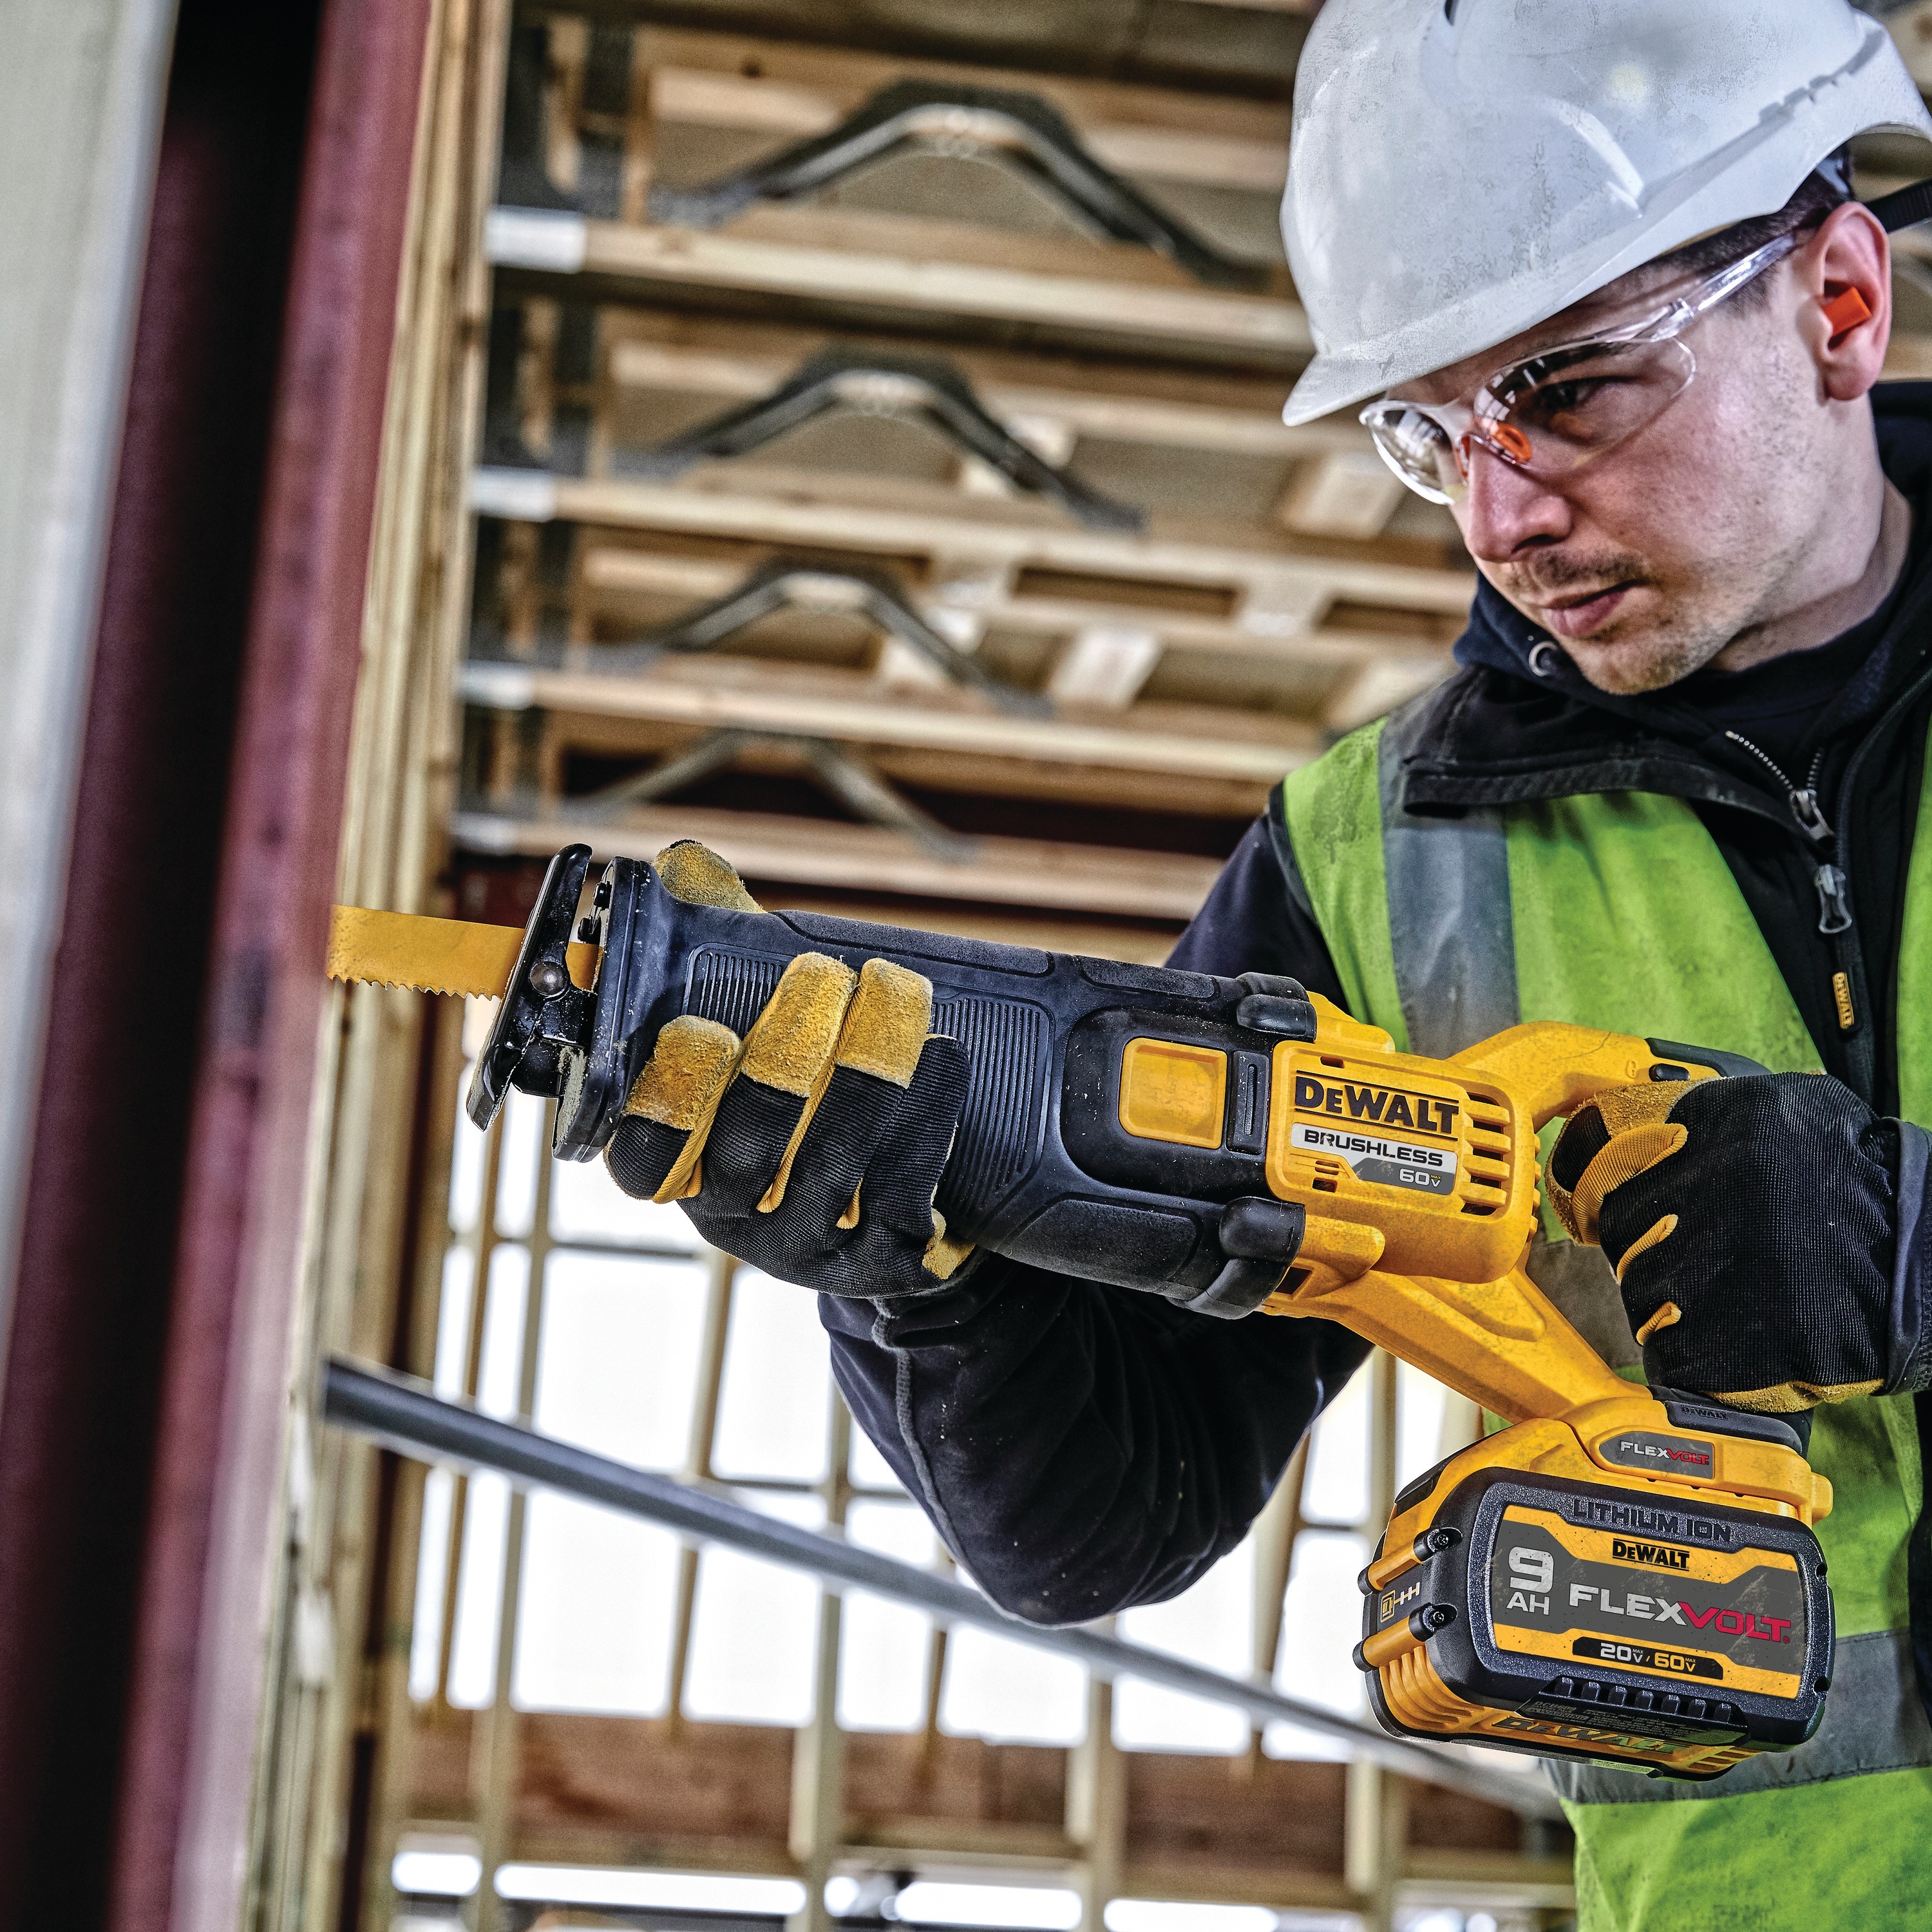 FLEXVOLT brushless cordless reciprocating saw being used by person.